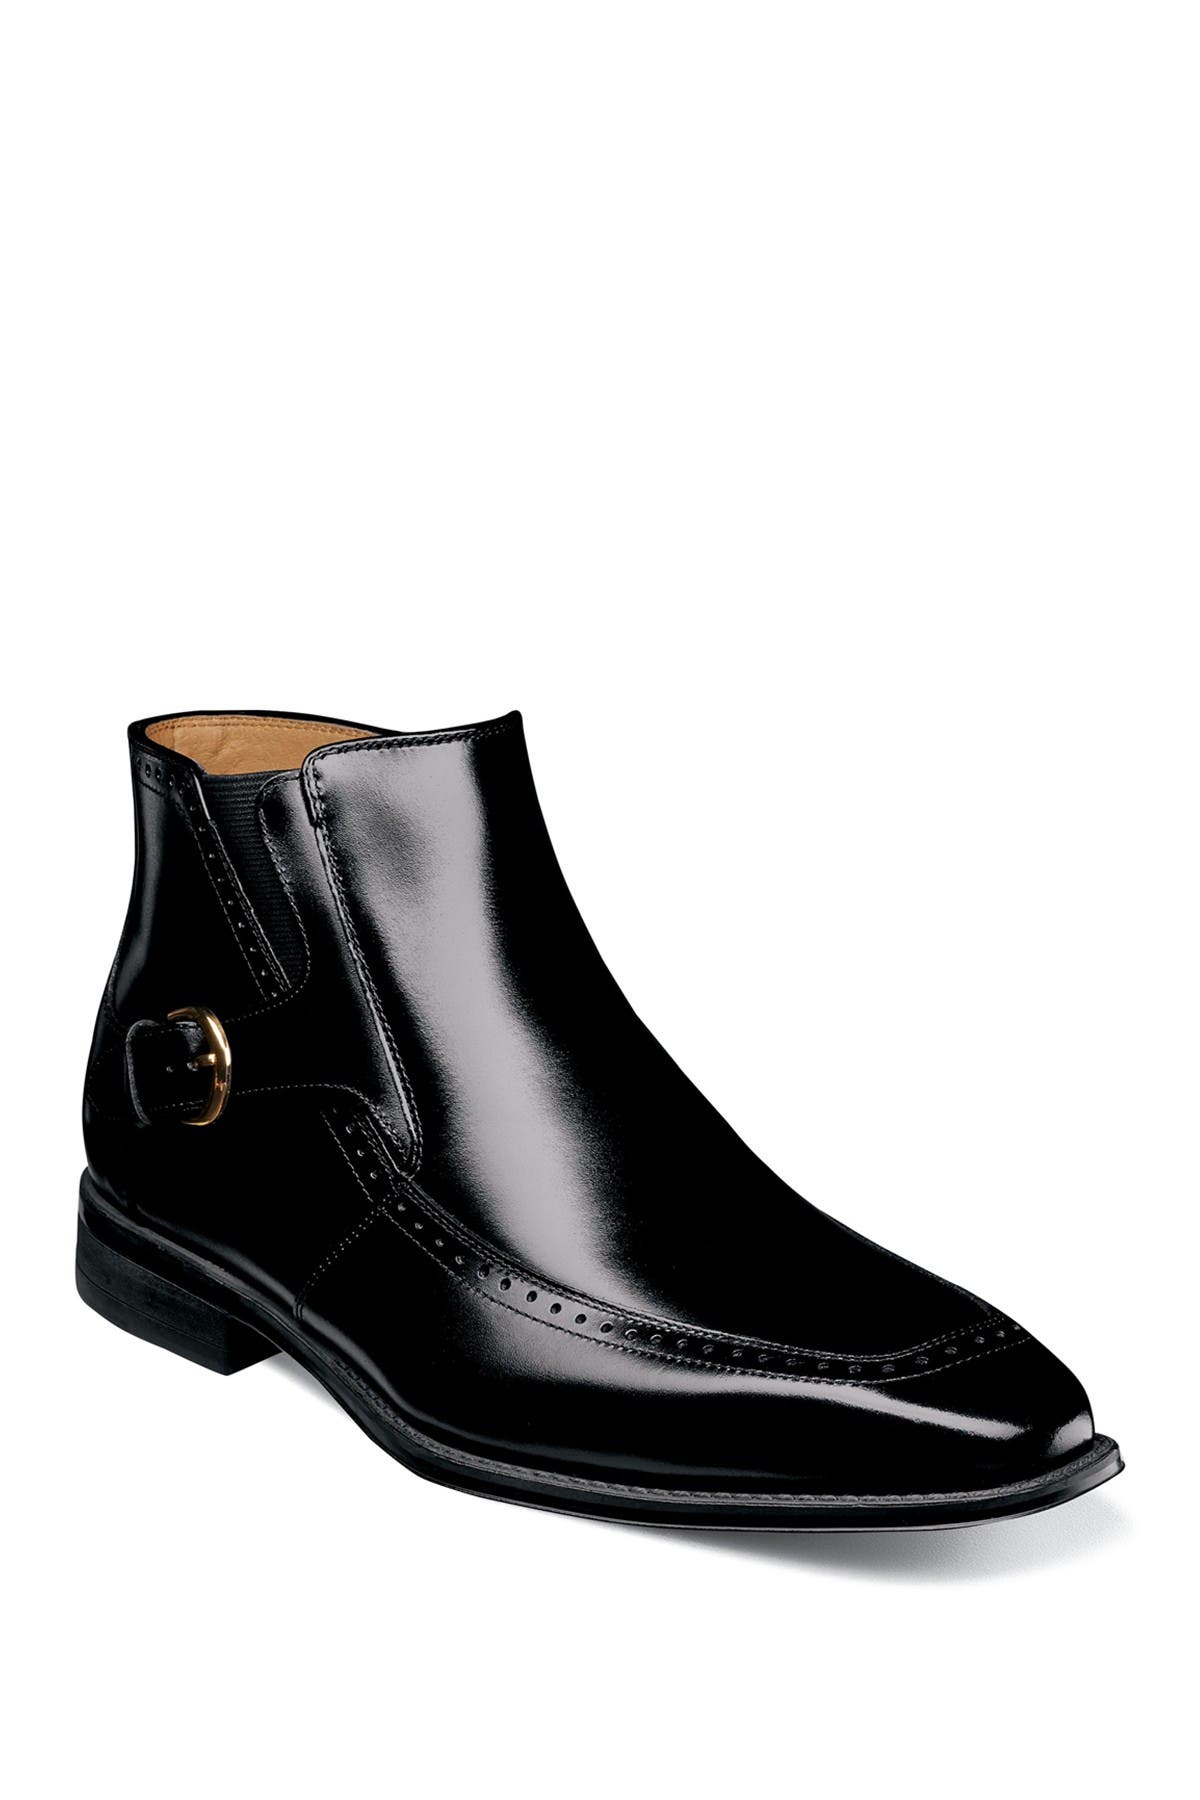 stacy adams chelsea boots